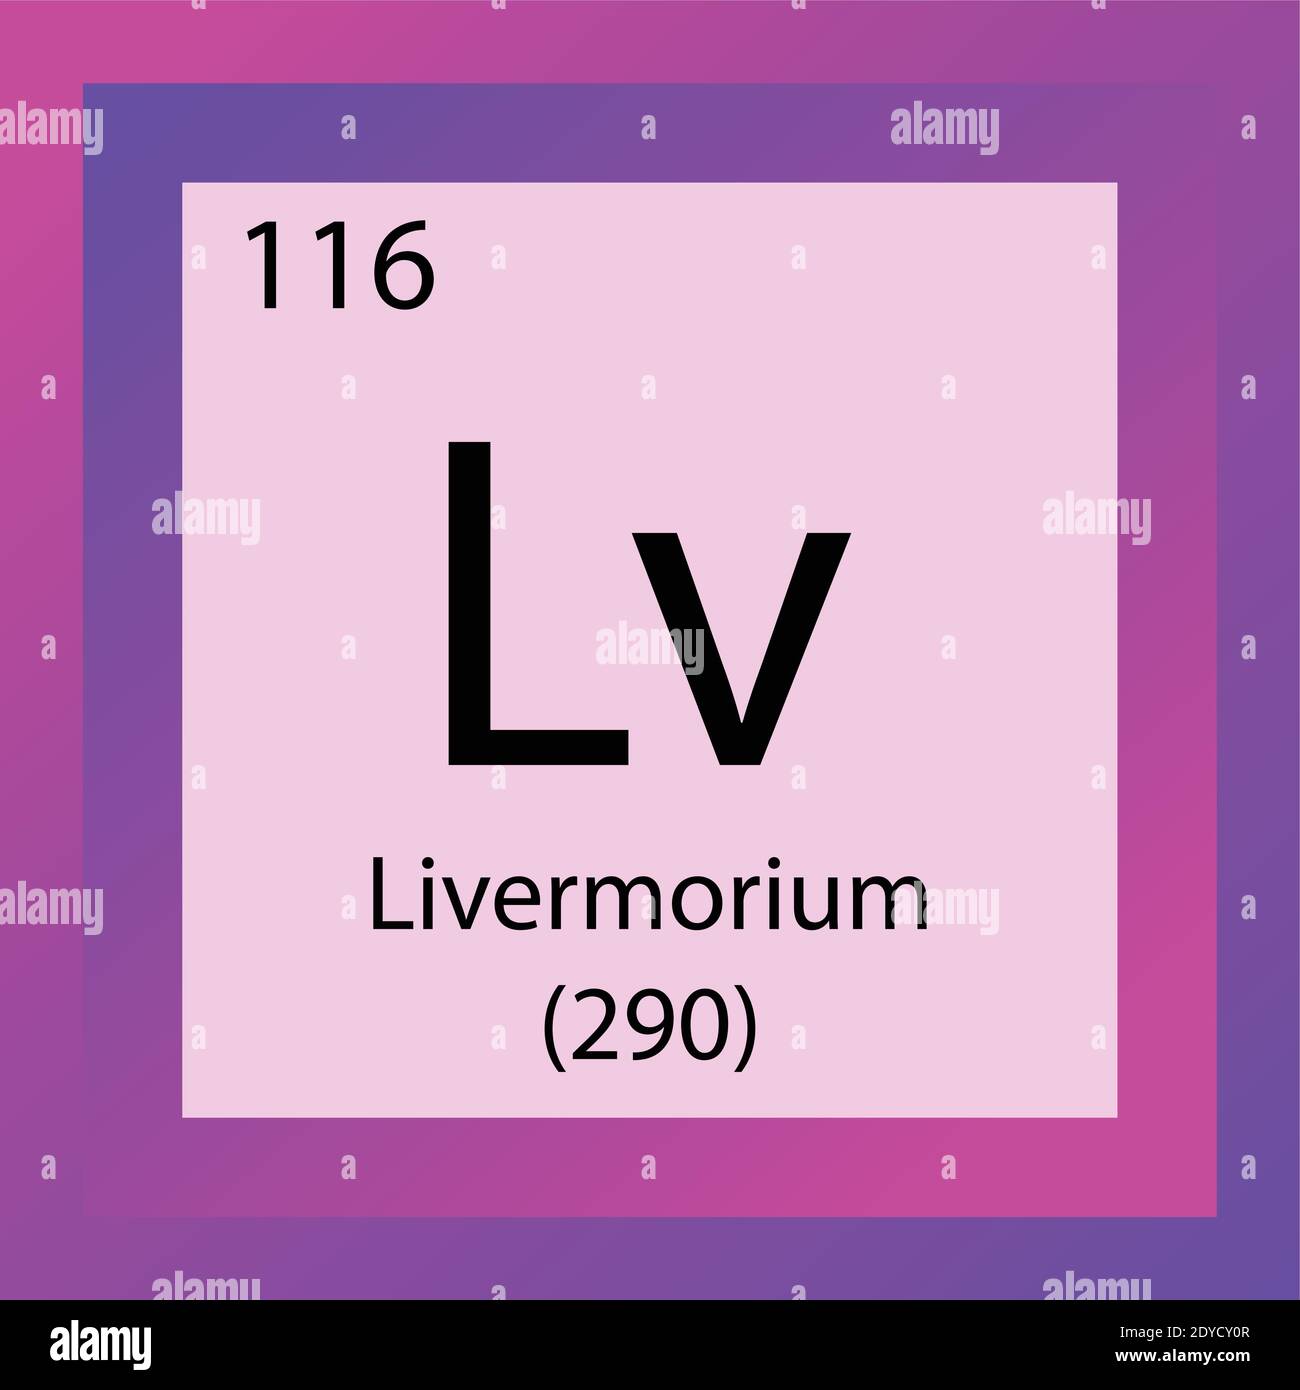 Lv Livermorium Chemical Element Periodic Table. Single element vector illustration, Element icon with molar mass and atomic number. Stock Vector